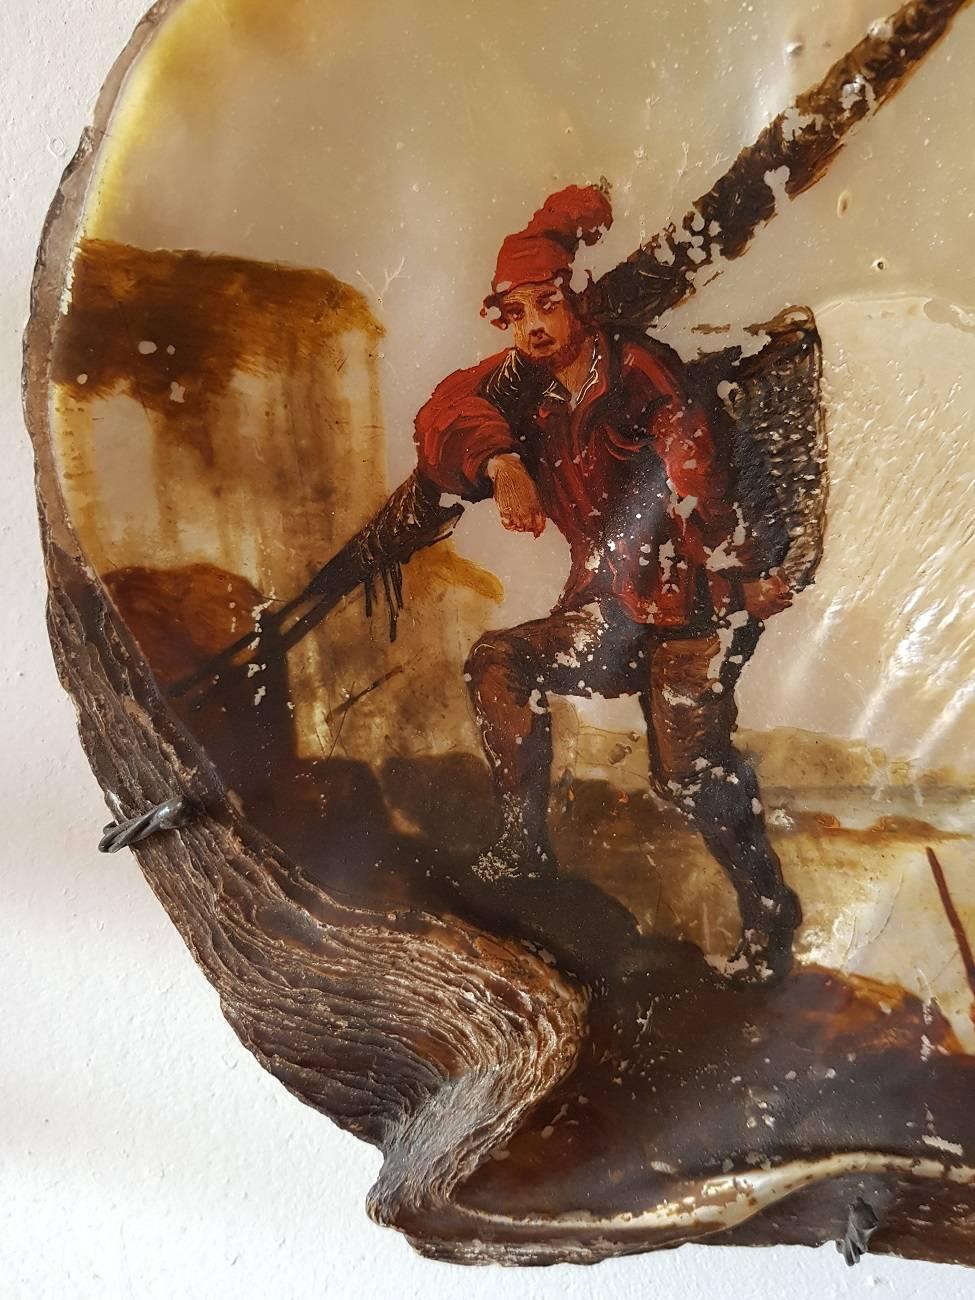 Late 18th century Italian painted oyster depicting two fishermen on the coast. It has some paint loss and is signed at the bottom right but unclear.

The measurements are,
Depth 2.5 cm/ 0.9 inch.
Width 22.5 cm/ 8.8 inch.
Height 21.5 cm/ 8.4